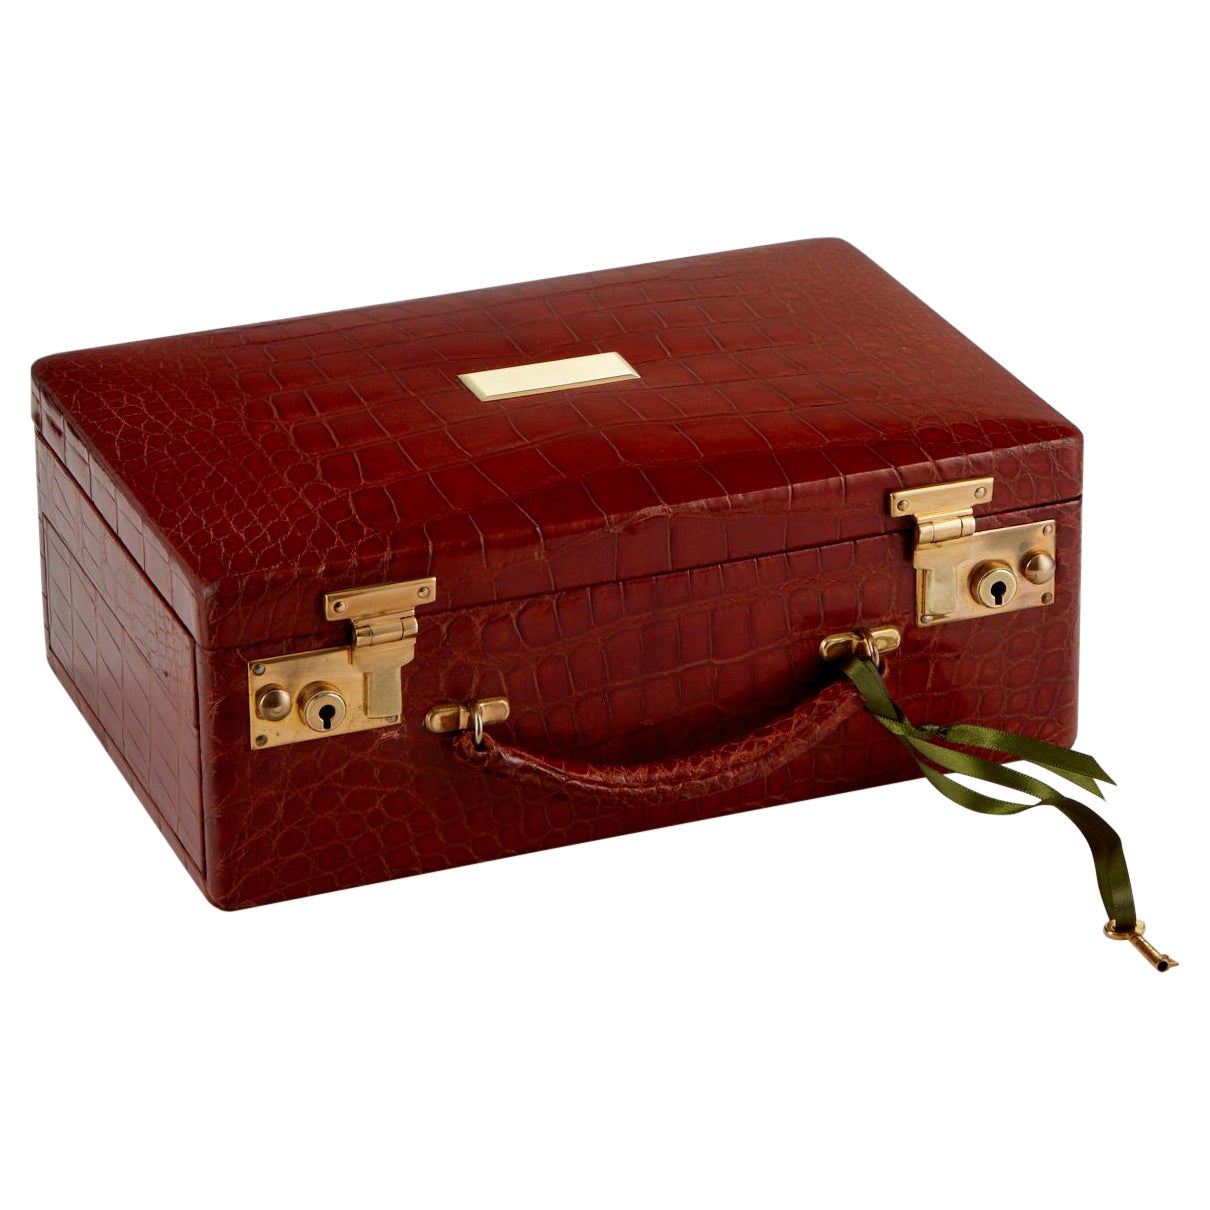 A wonderful Antique London Tan Crocodile jewelry box with lift tray opening, circa 1918-20

Beautifully matched crocodile skins have been used on this jewel box. 
Both the exterior and interior are in fantastic order, probably thanks to a